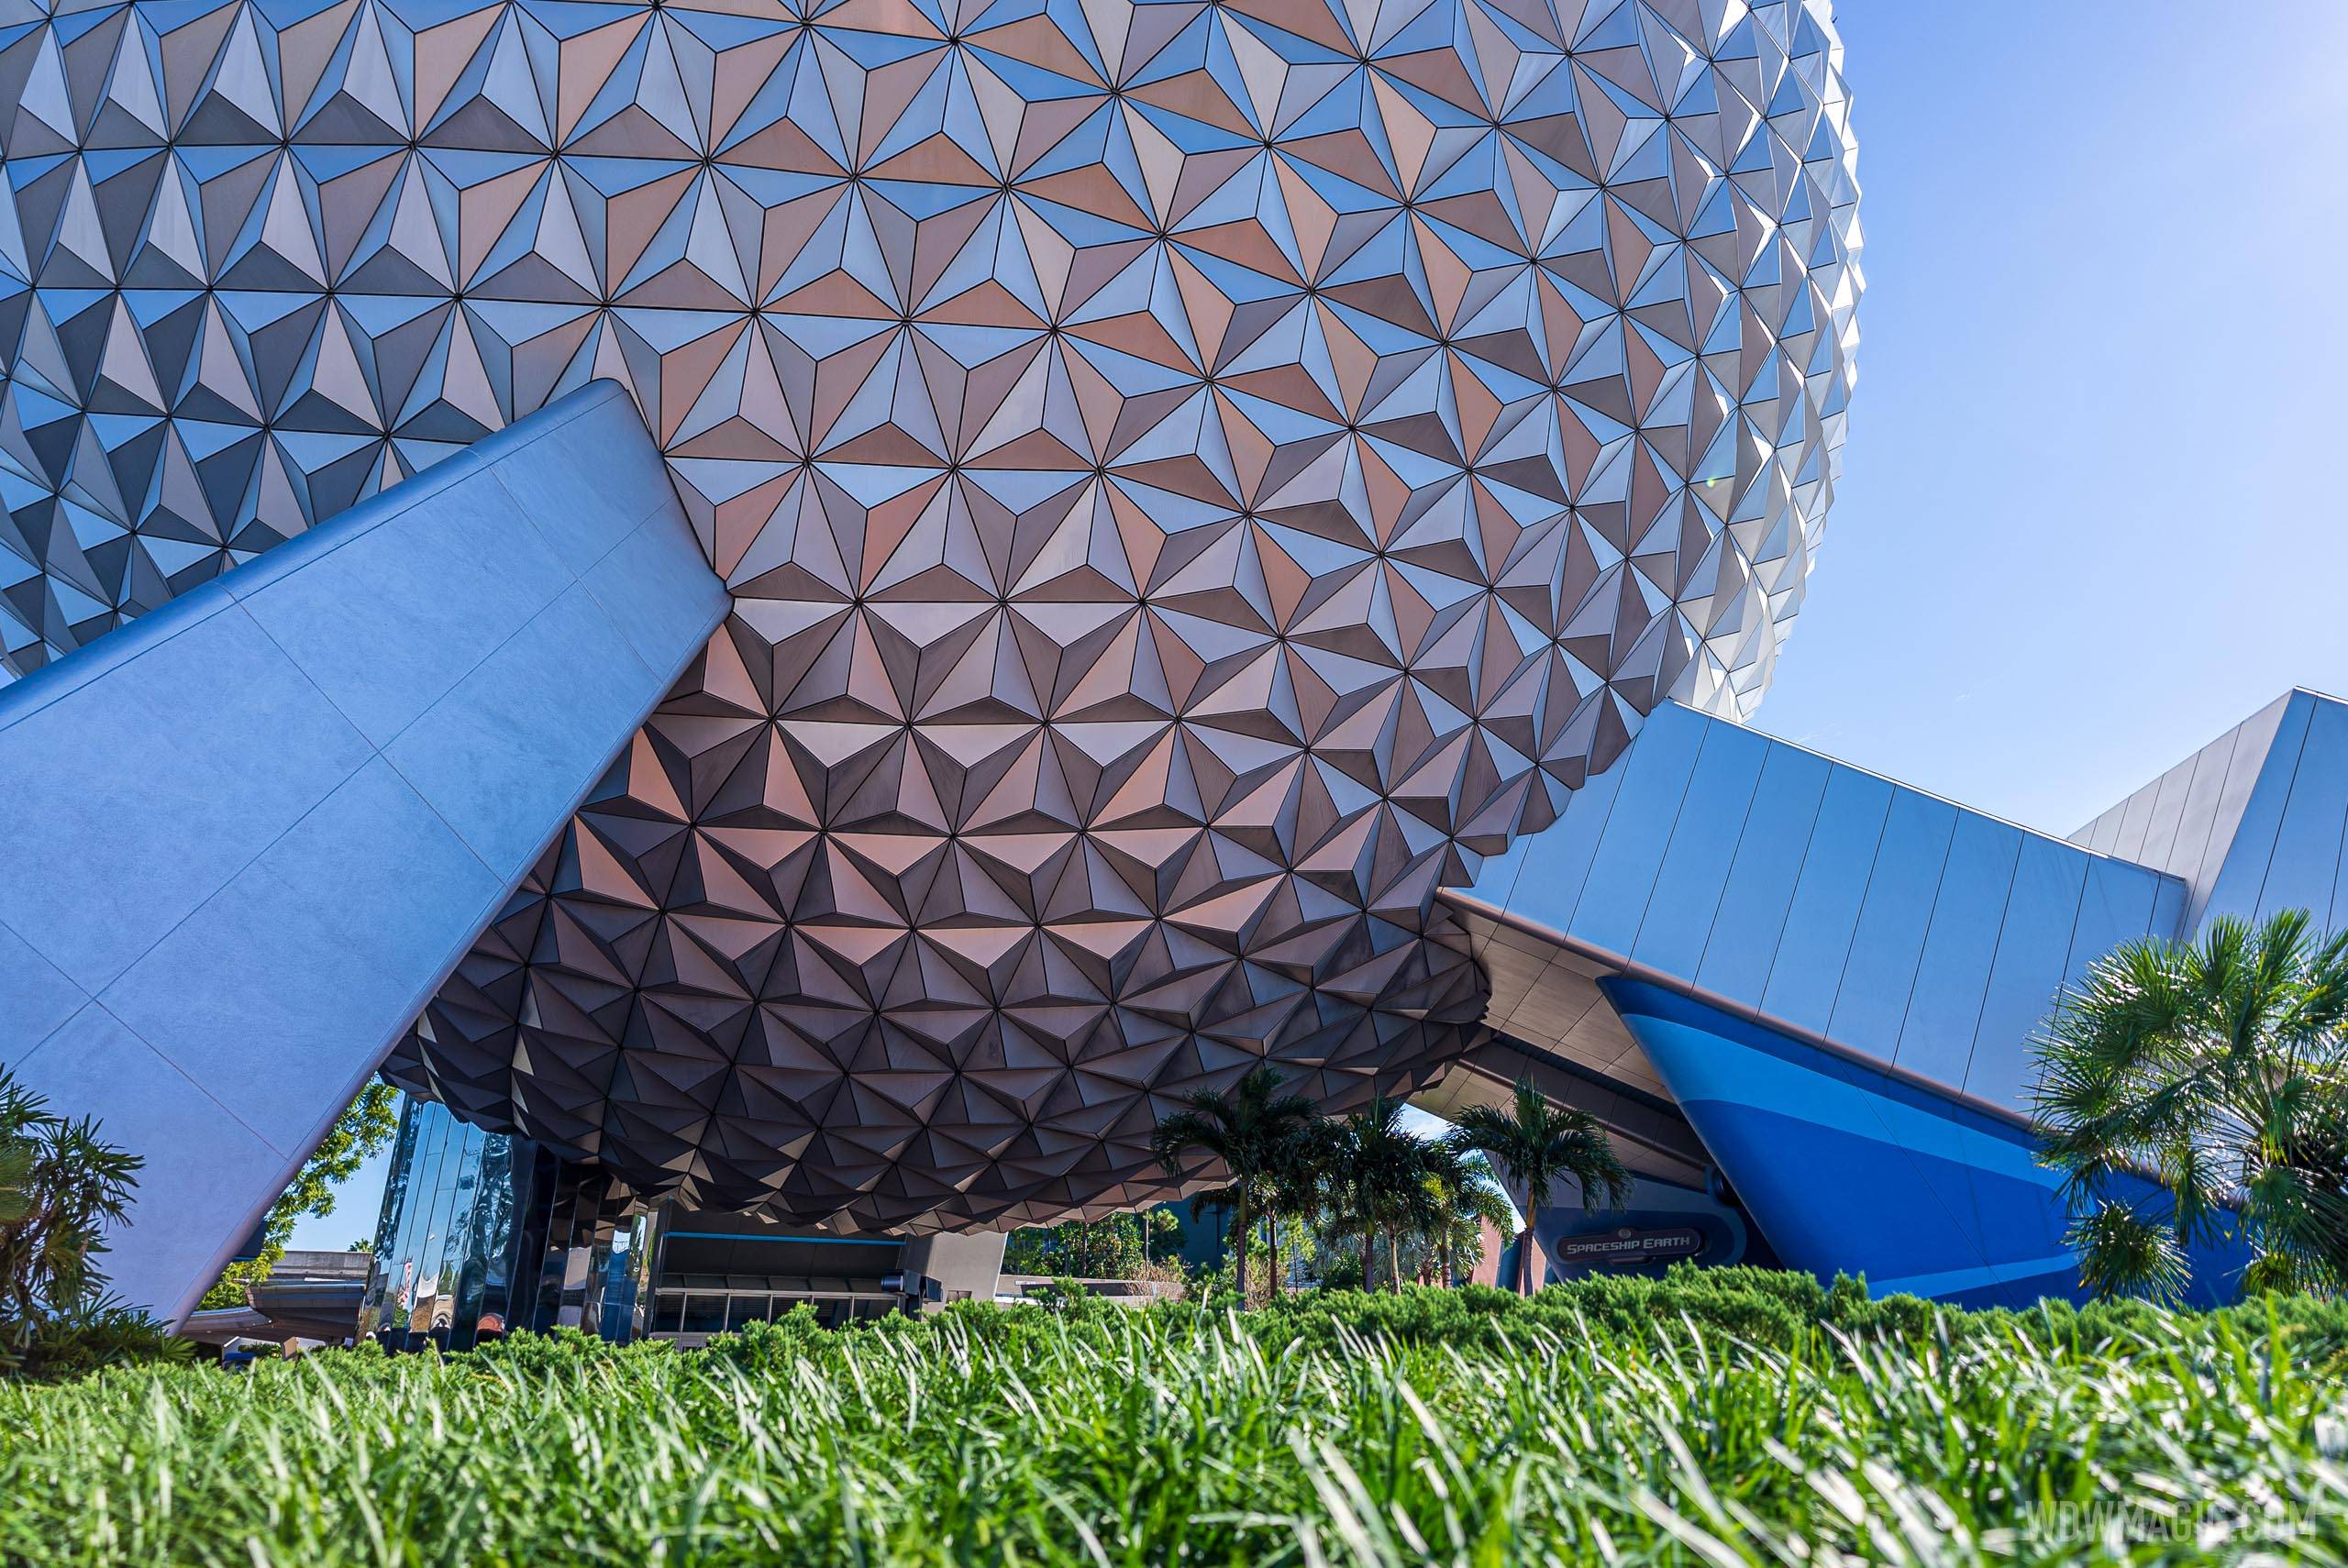 Spaceship Earth construction walls removed 